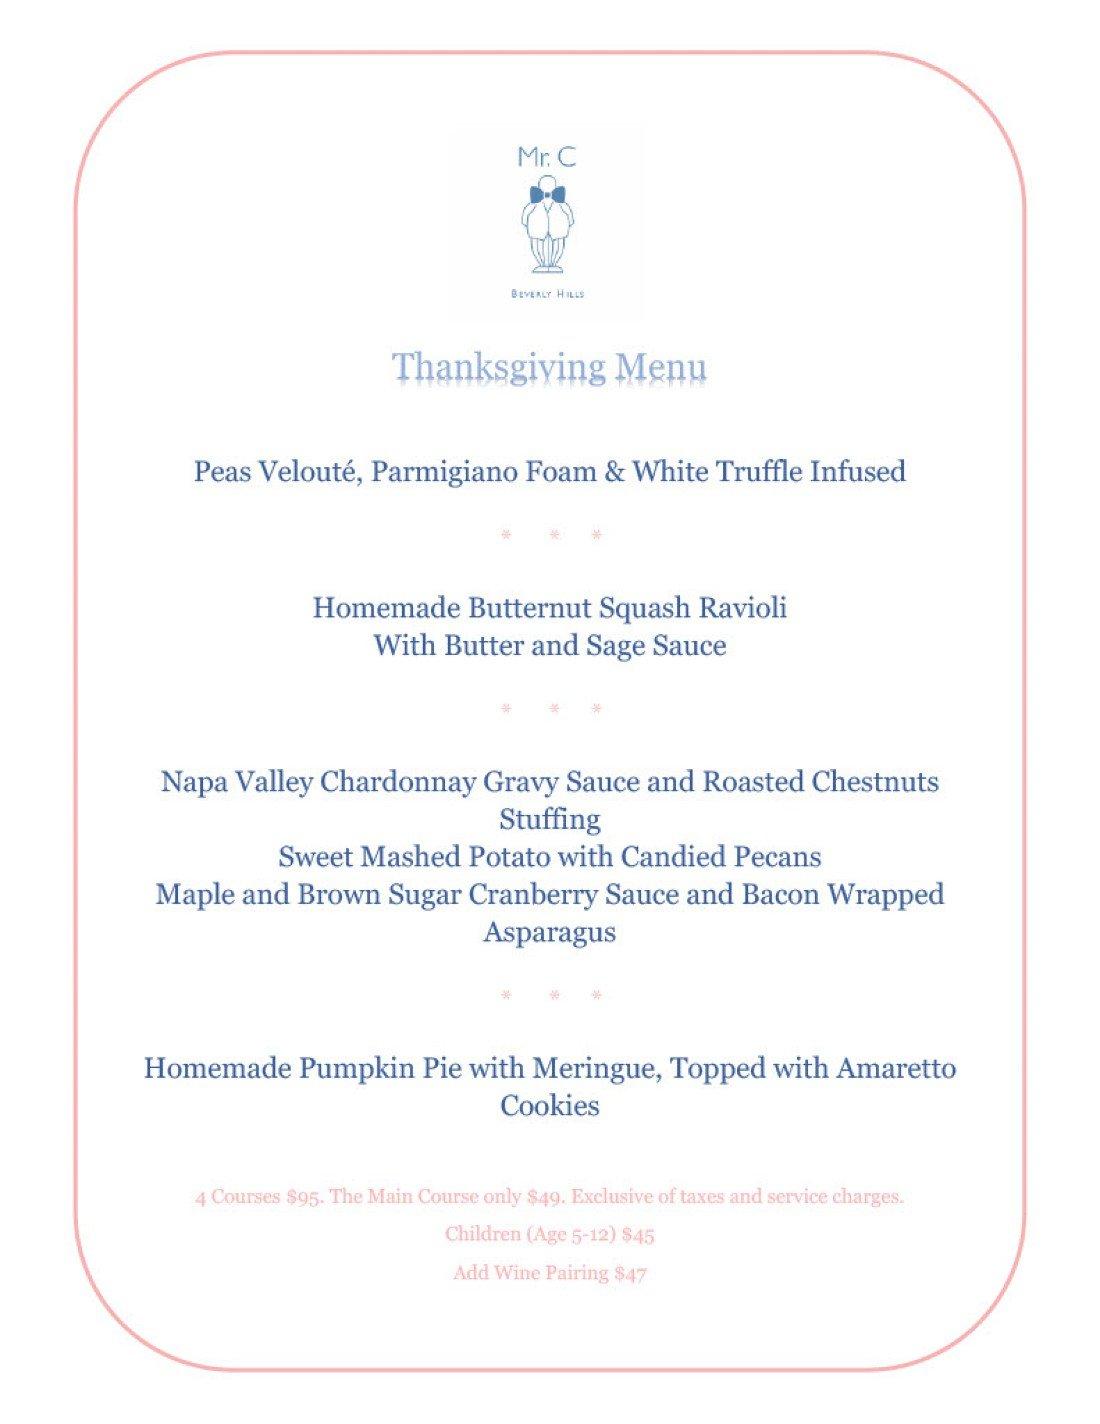 Thanksgiving Special Offering at Mr. C Beverly Hills